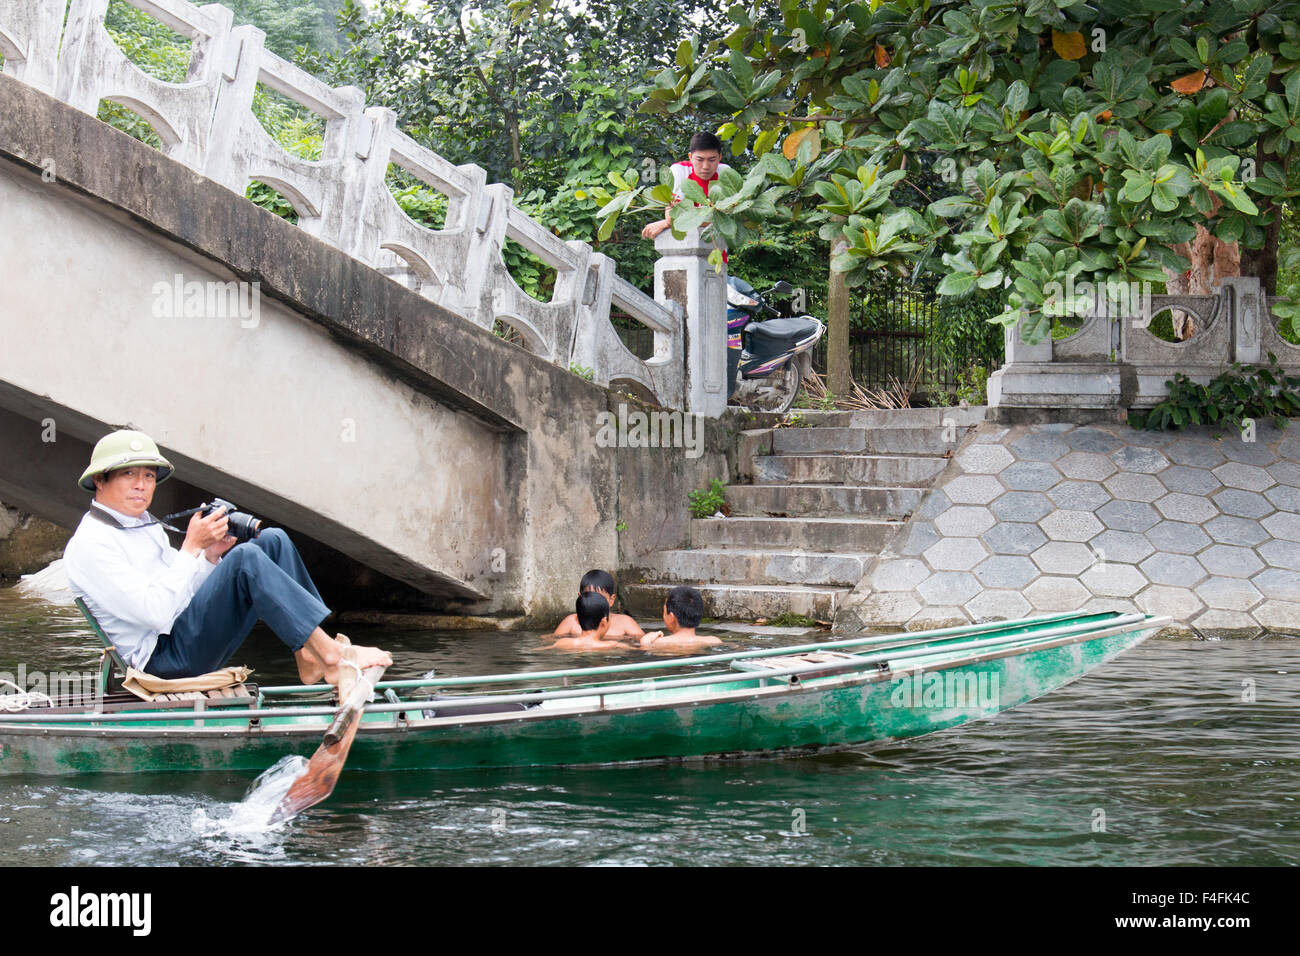 three boys swim bathe in ngo dong river whilst man waits to photograph tourists in the row boats,Ninh binh ,Vietnam Stock Photo